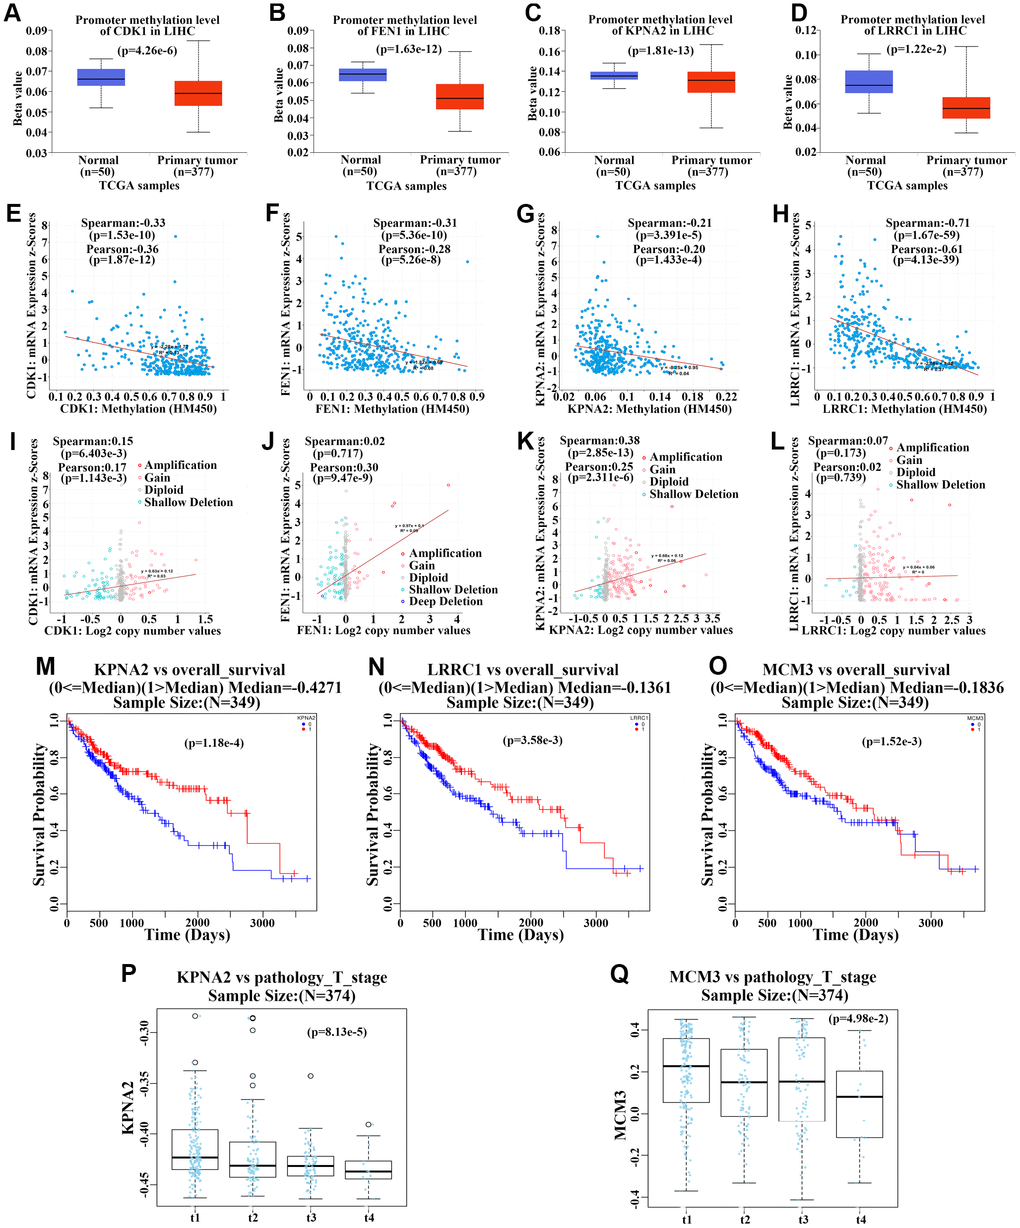 Methylation and gene copy number analyses of upregulated hub genes. (A–D) Methylation levels of CDK1 (A), FEN1 (B), KPNA2 (C), and LRRC1 (D) in primary hepatocellular carcinoma (HCC) tumors and normal tissues from the TCGA cohort. (E–H) Correlation analysis of methylation levels of CDK1 (E), FEN1 (F), KPNA2 (G), and LRRC1 (H) and their mRNA expression in HCC based on the TCGA cohort. (I–L) Correlation analysis of gene copy numbers of CDK1 (I), FEN1 (J), KPNA2 (K), and LRRC1 (L) and their mRNA expression in HCC based on the TCGA cohort. (M–O) Survival analysis of the correlation between methylation levels of KPNA2 (M), LRRC1 (N), and MCM3 (O) and overall survival (OS) in HCC patients from the TCGA cohort. (P–Q) Analysis of the association between KPNA2 (P) and MCM3 (Q) methylation and pathologic T stage in HCC patients of the TCGA cohort.